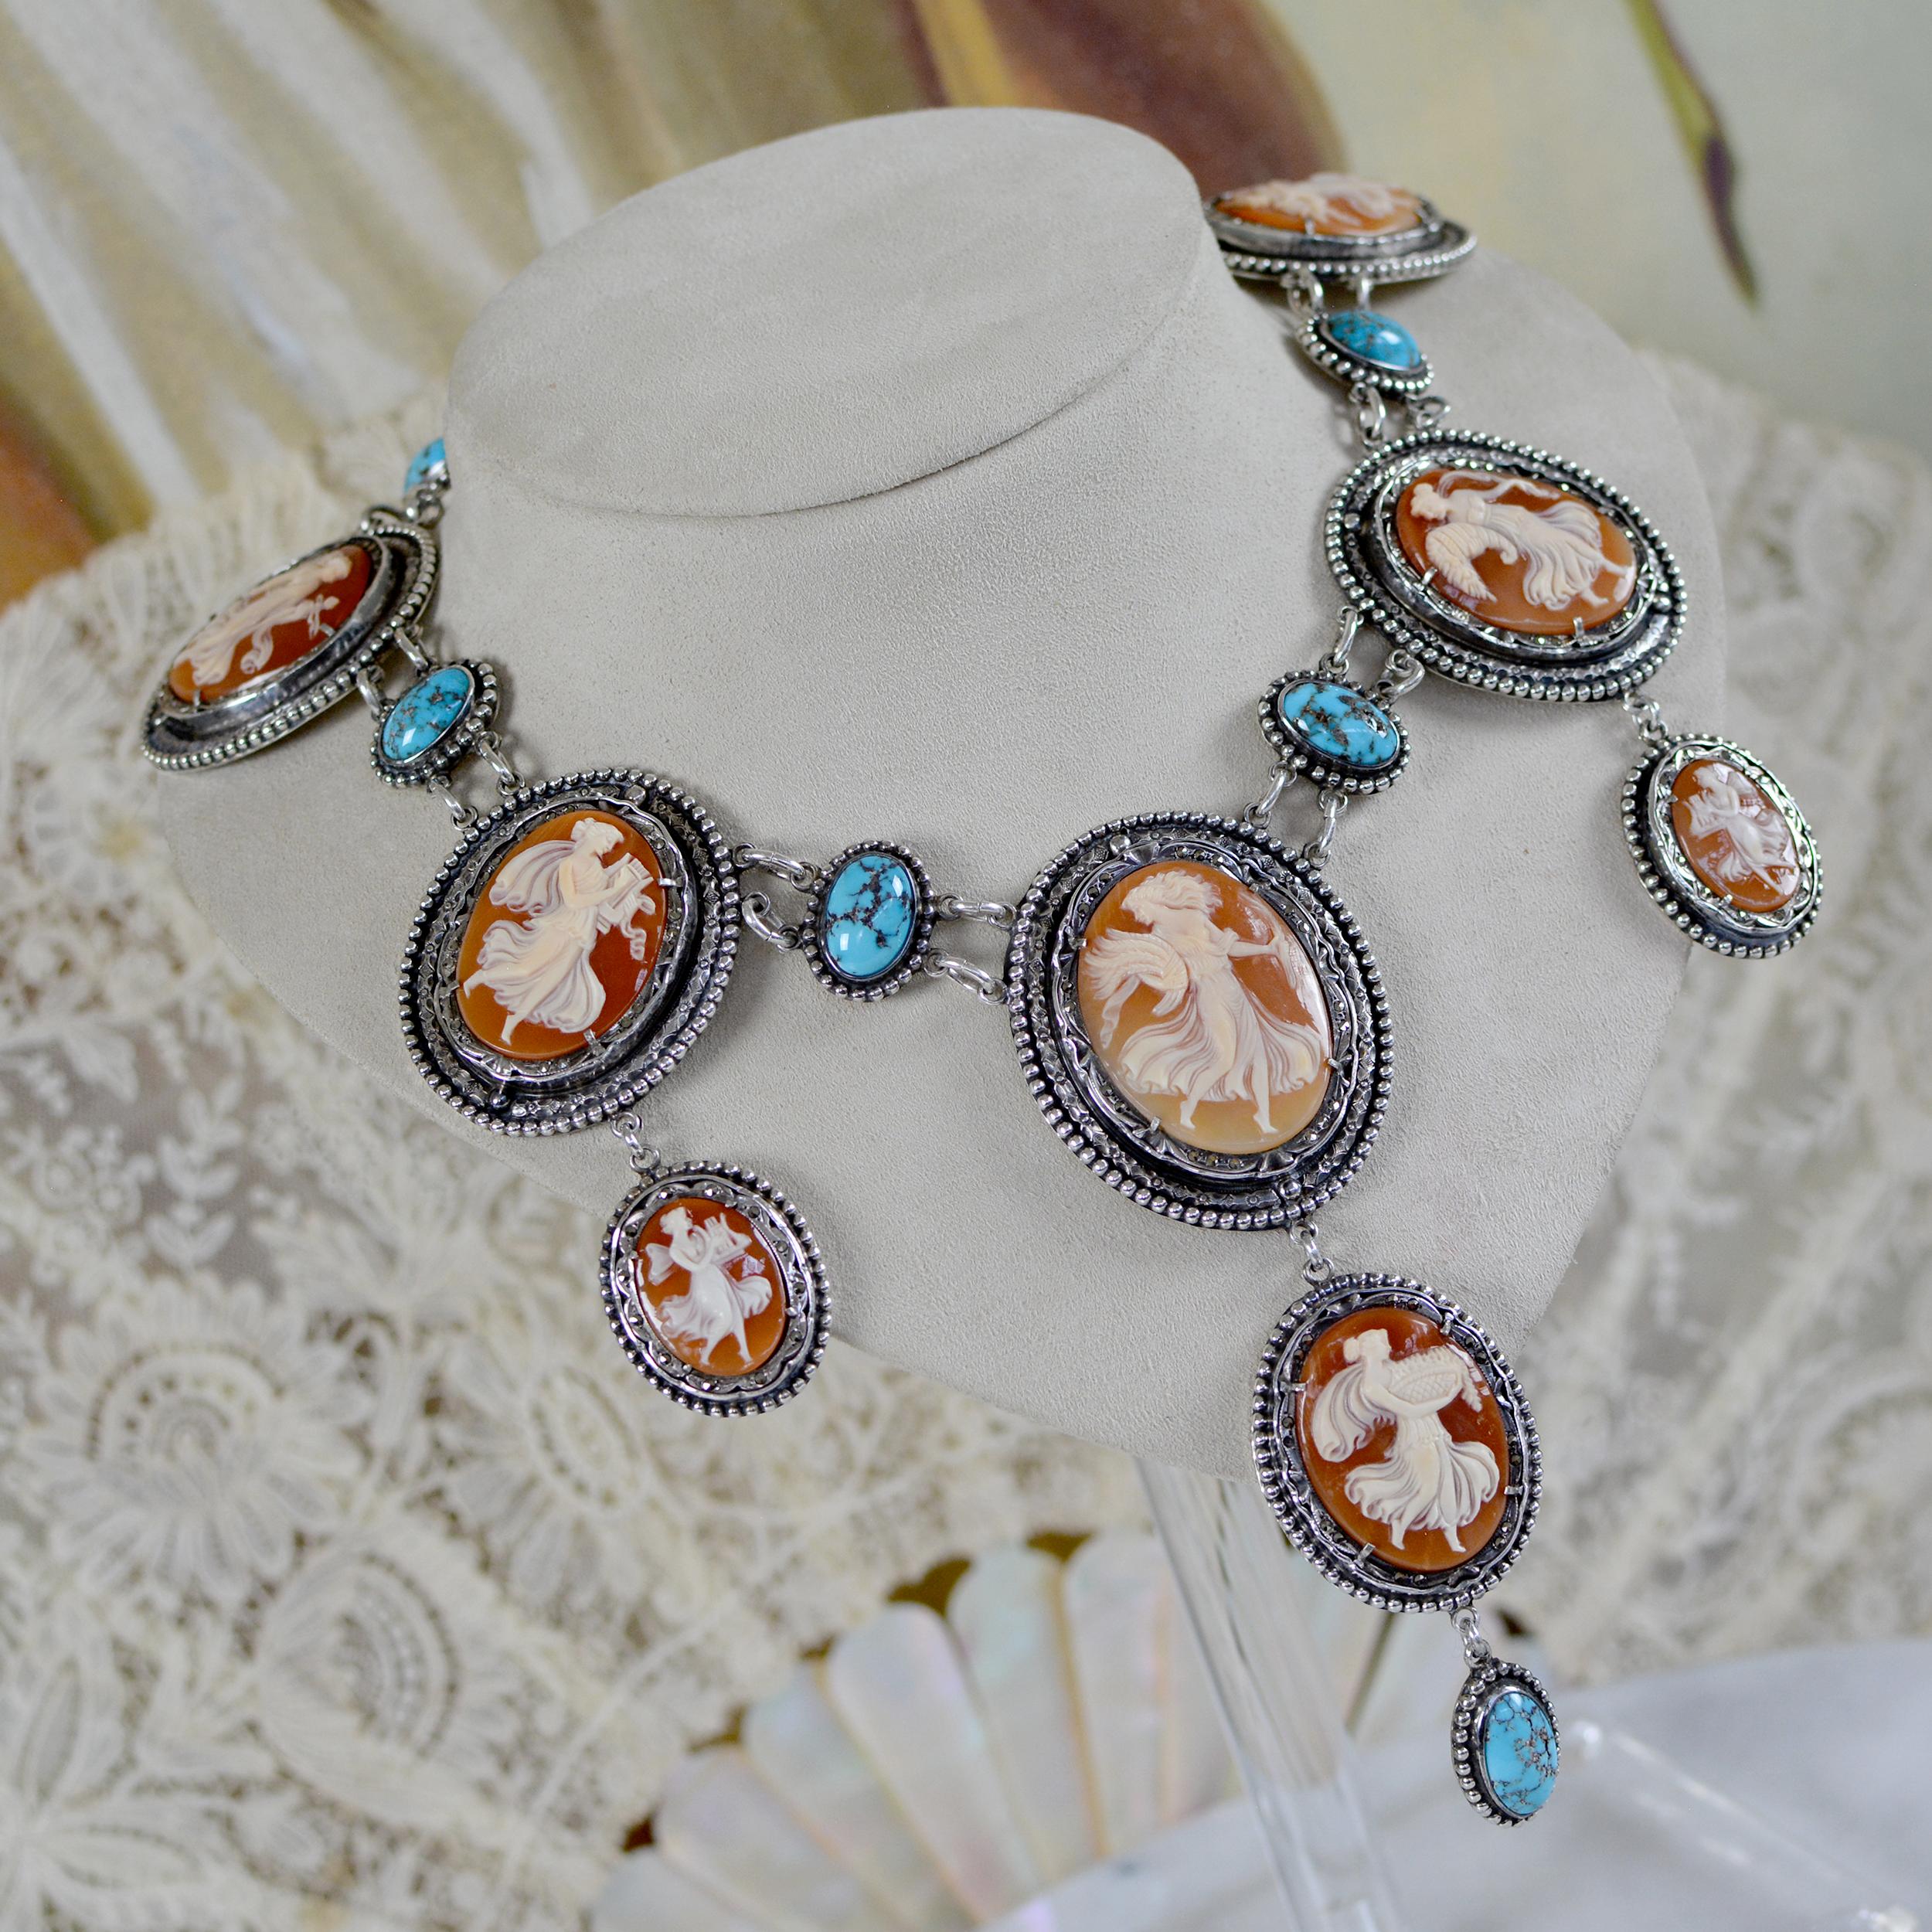 Jill Garber 19th. C. Terpsichore Cameo Suite Necklace with Persian Turquoise  In Excellent Condition For Sale In Saginaw, MI